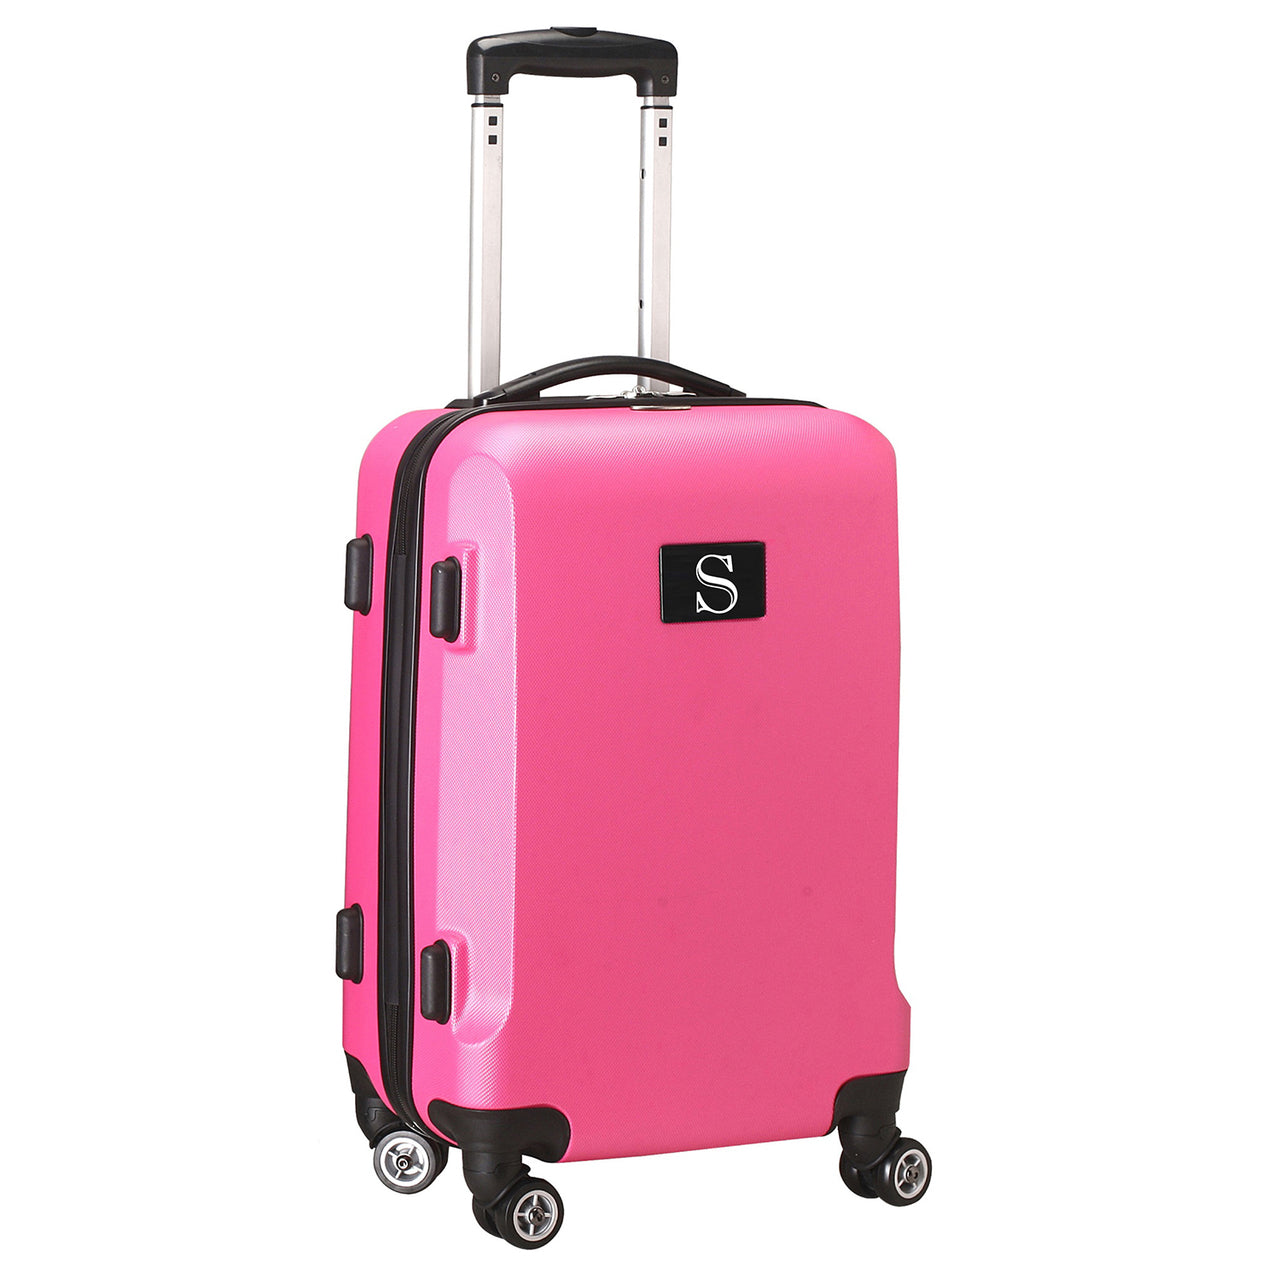 Personalized Initial Name letter "S" 20 inches Carry on Hardcase Spinner Luggage by Mojo in PINK